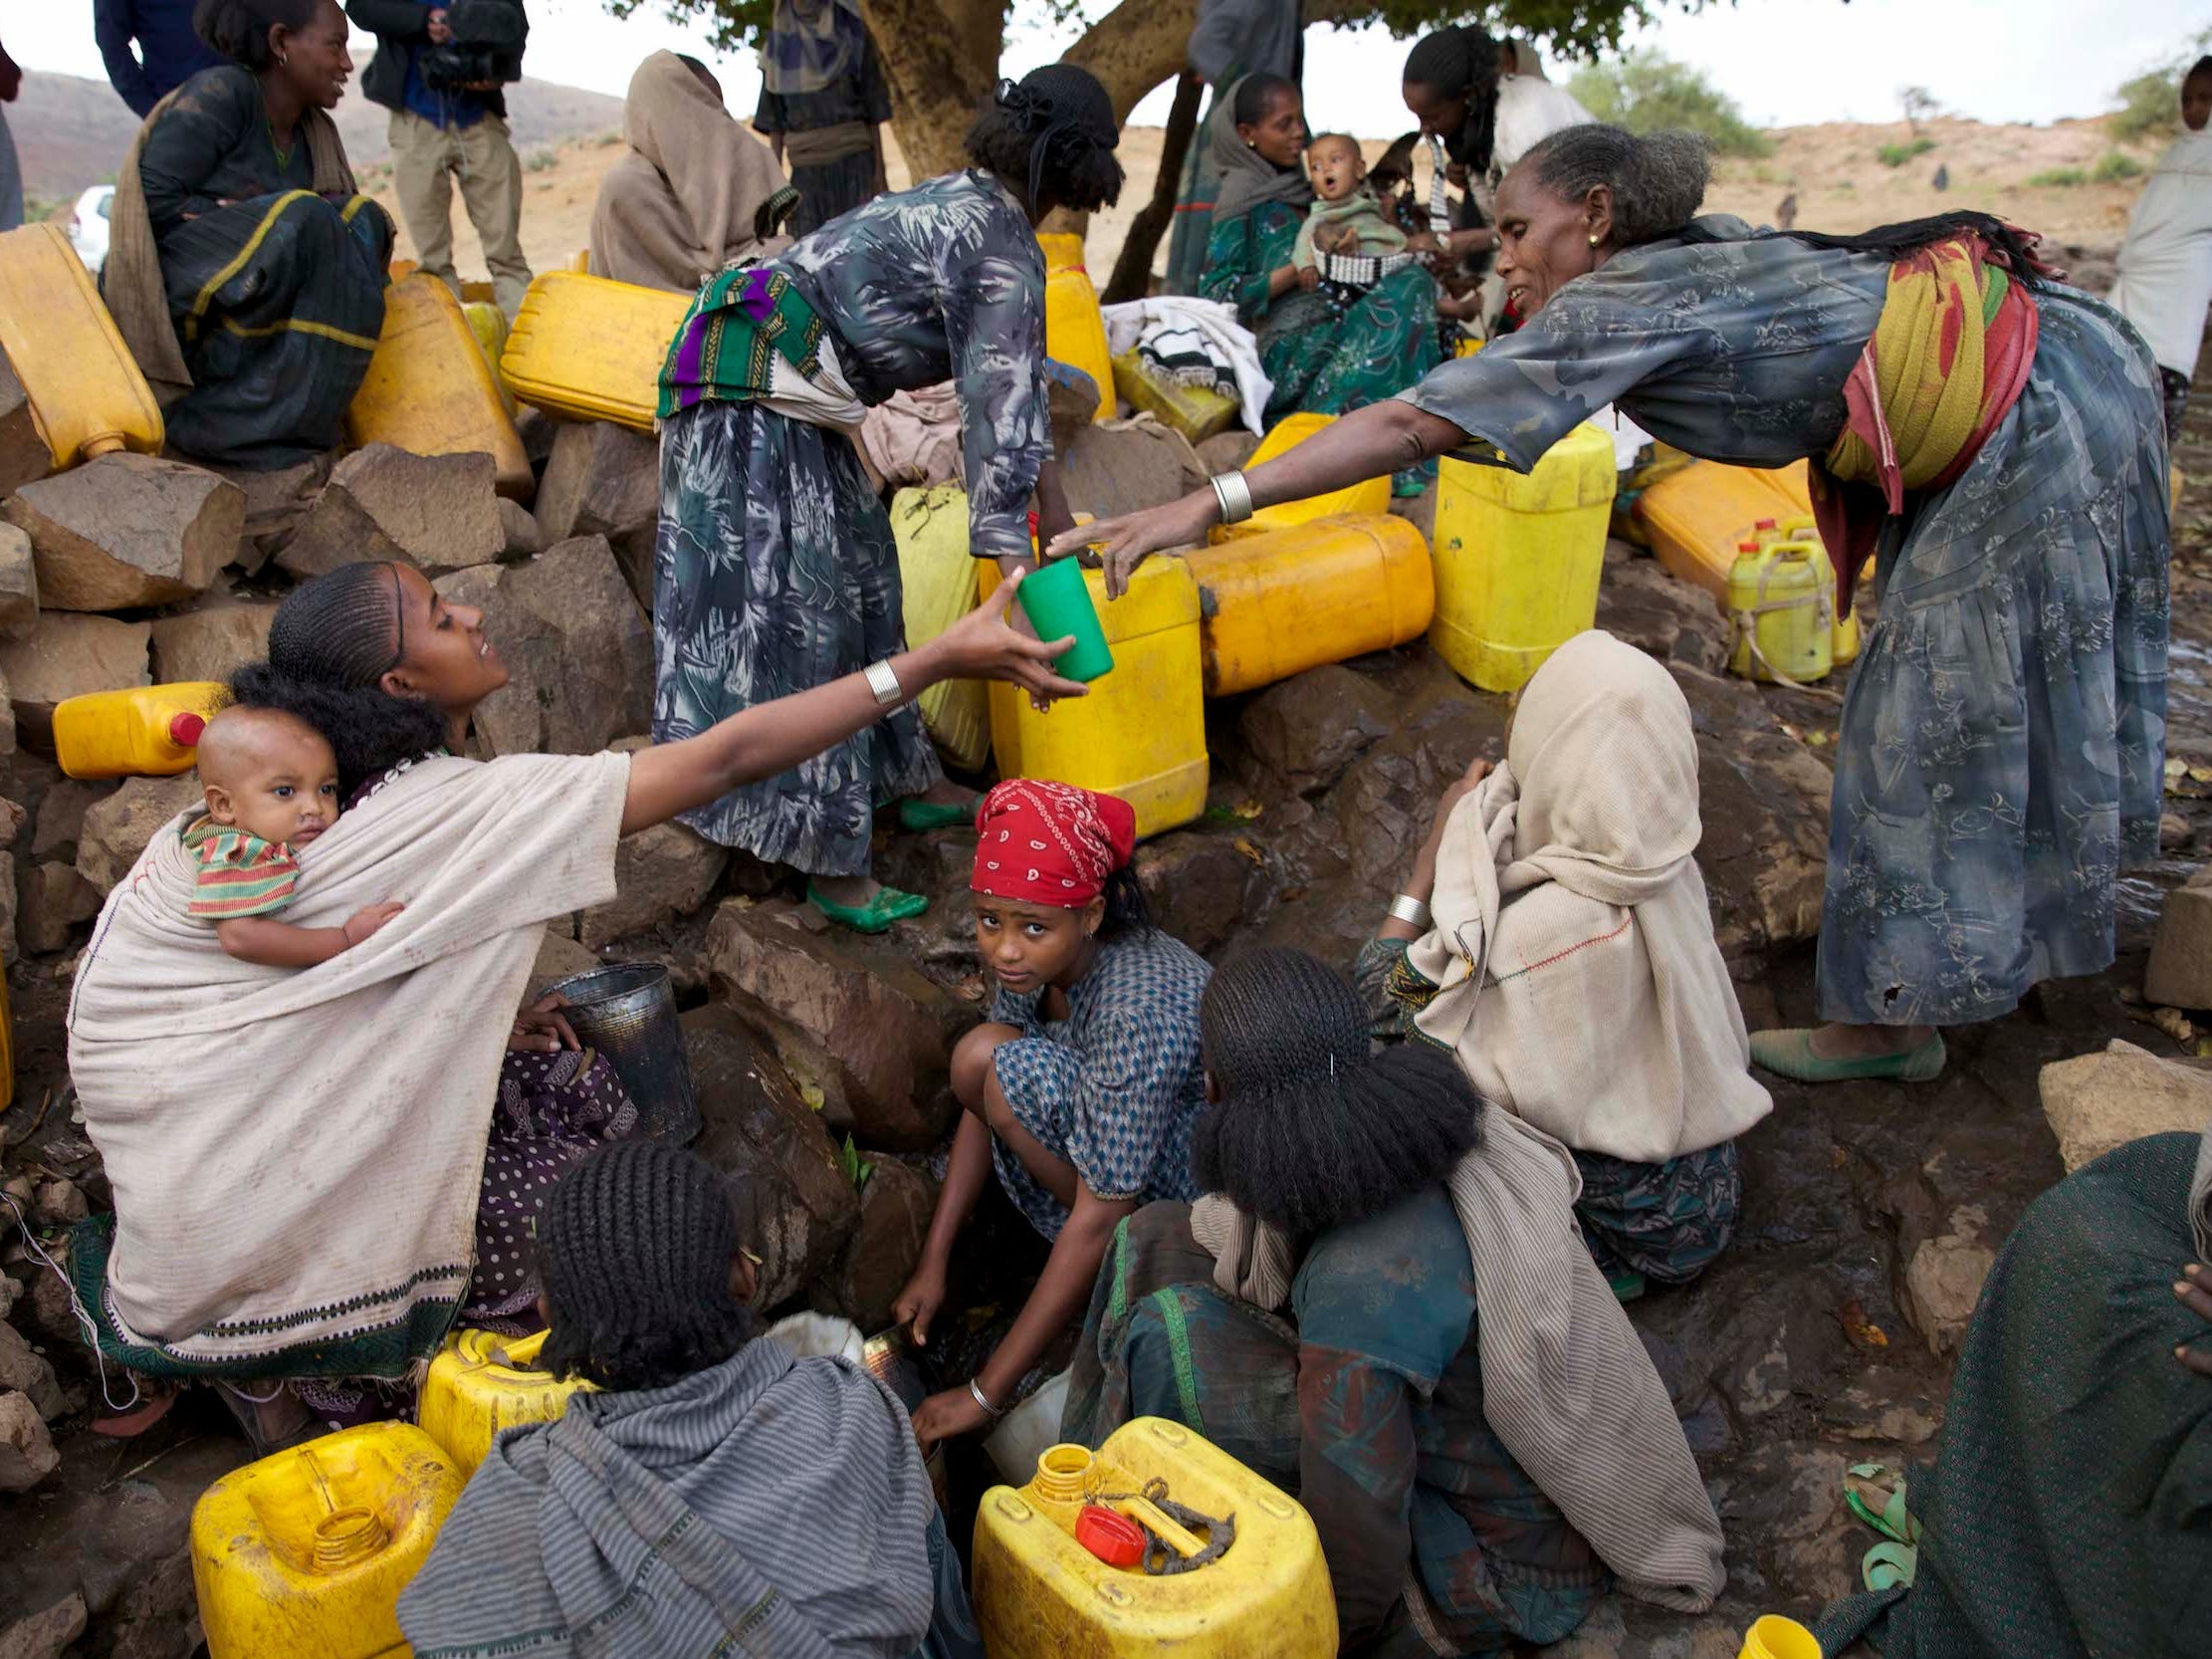 women surrounded by large yellow jugs collect water from a muddy stream some carrying babies